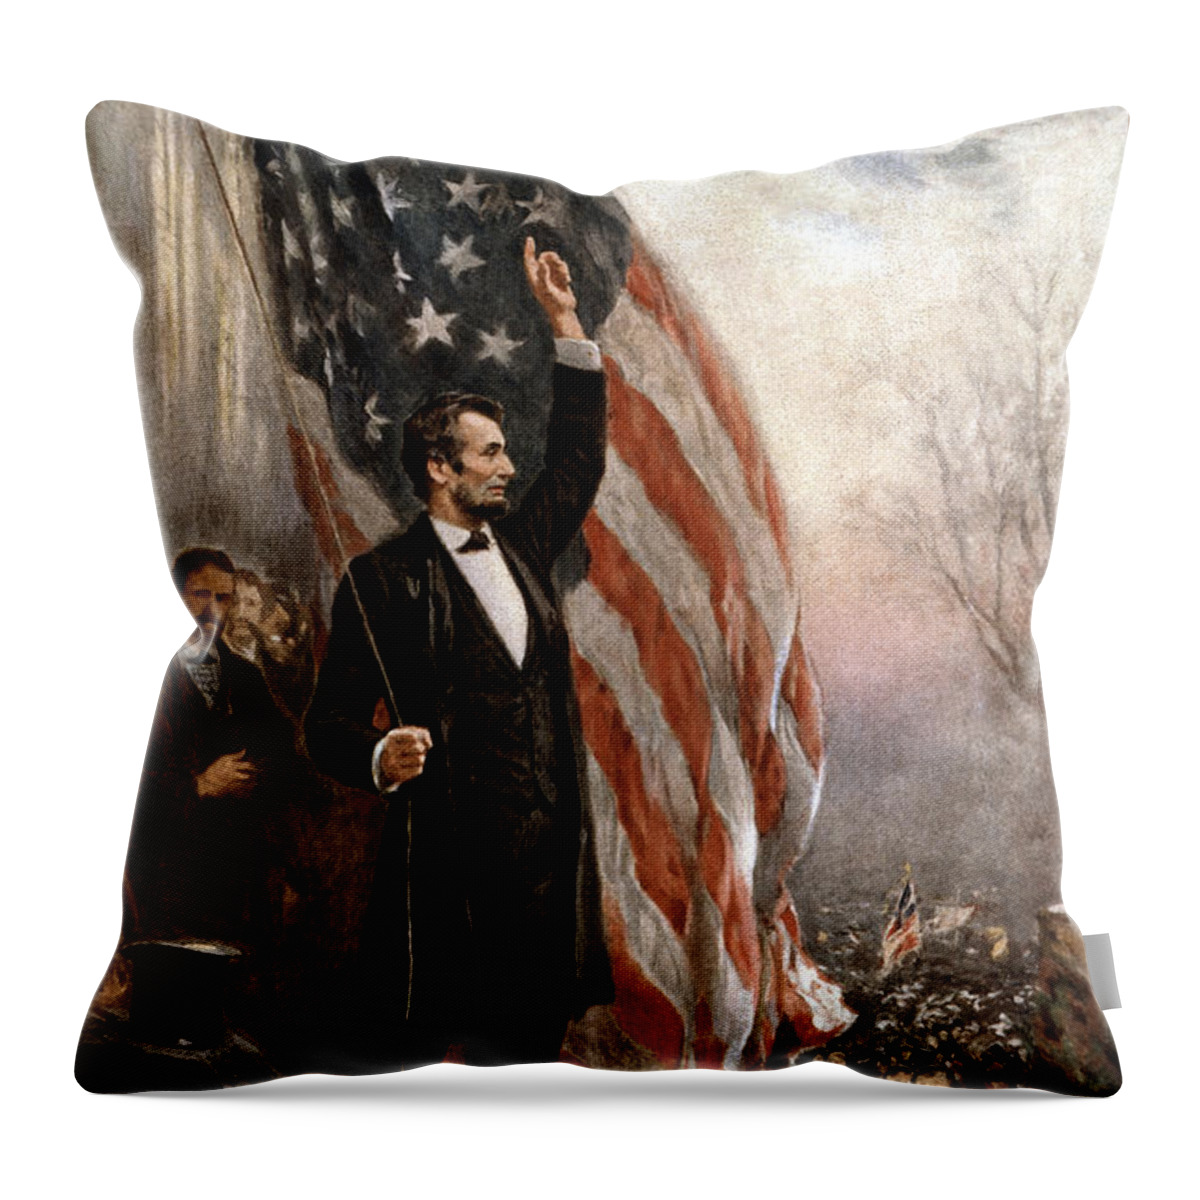 Abraham Lincoln Throw Pillow featuring the painting President Abraham Lincoln Giving A Speech by War Is Hell Store